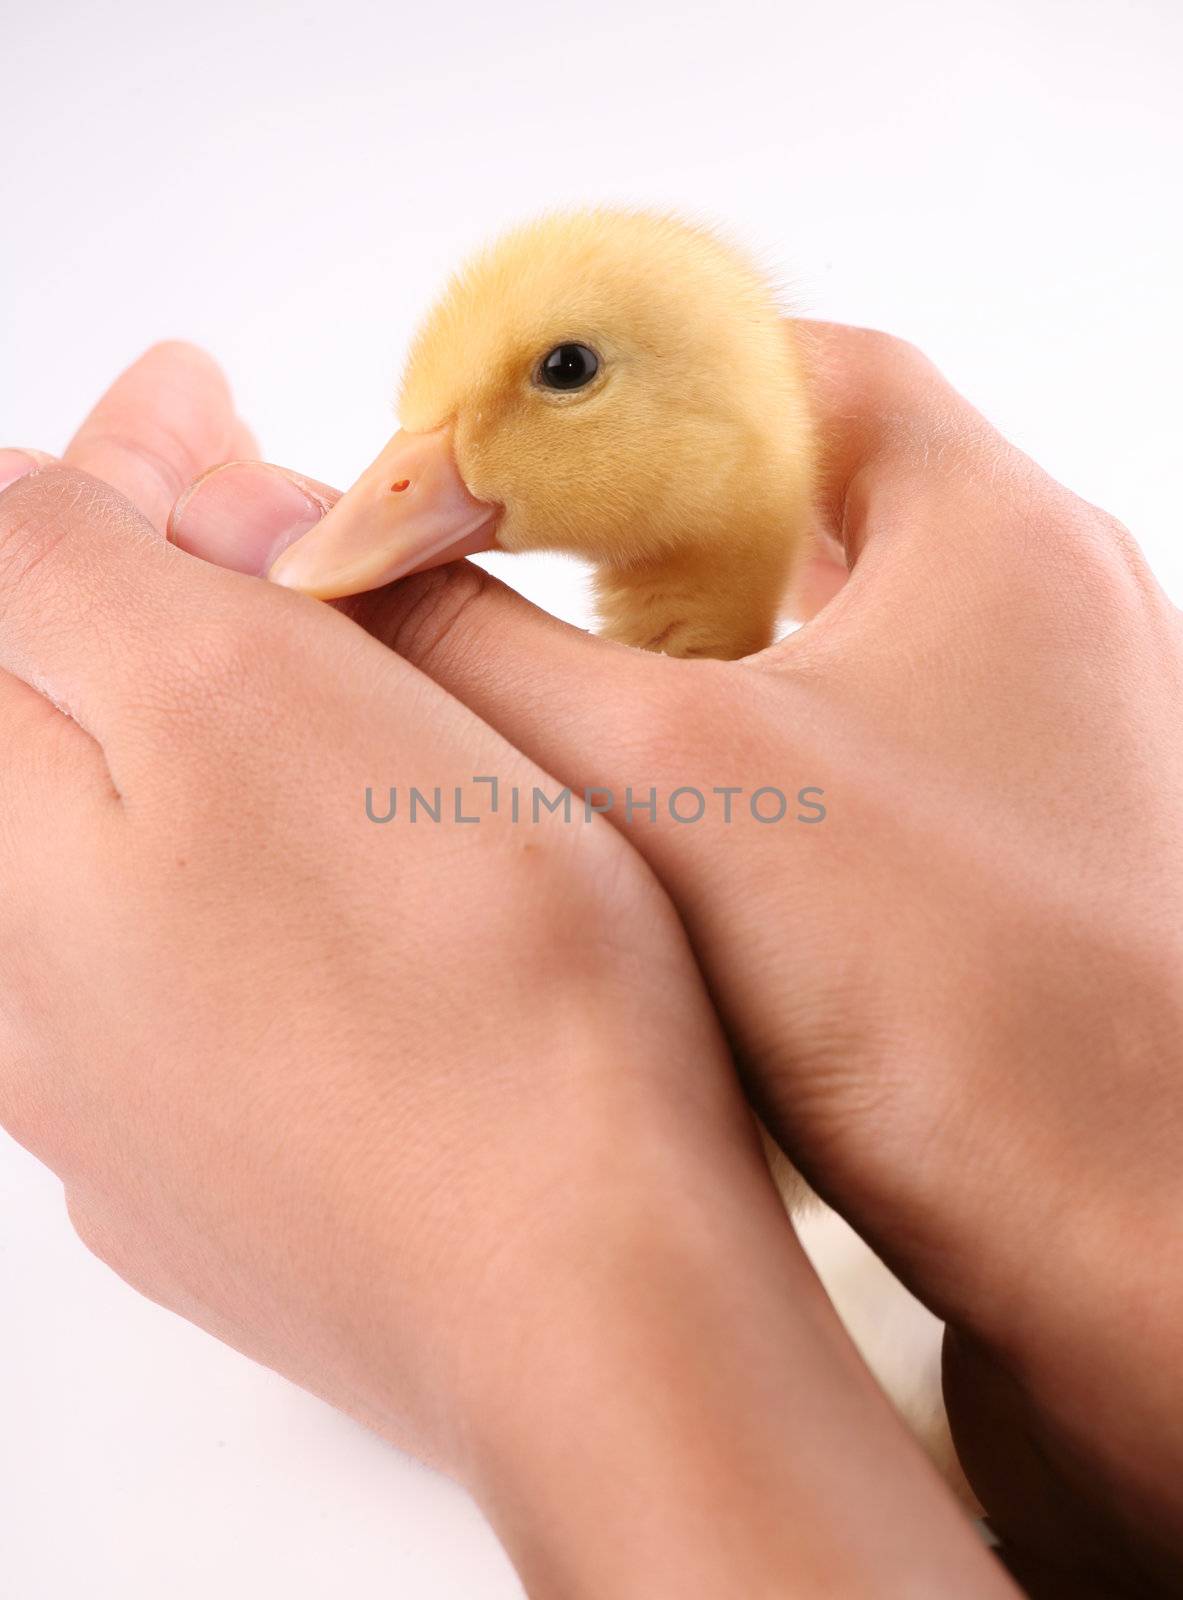 Adorable yellow duckling held in child's hand